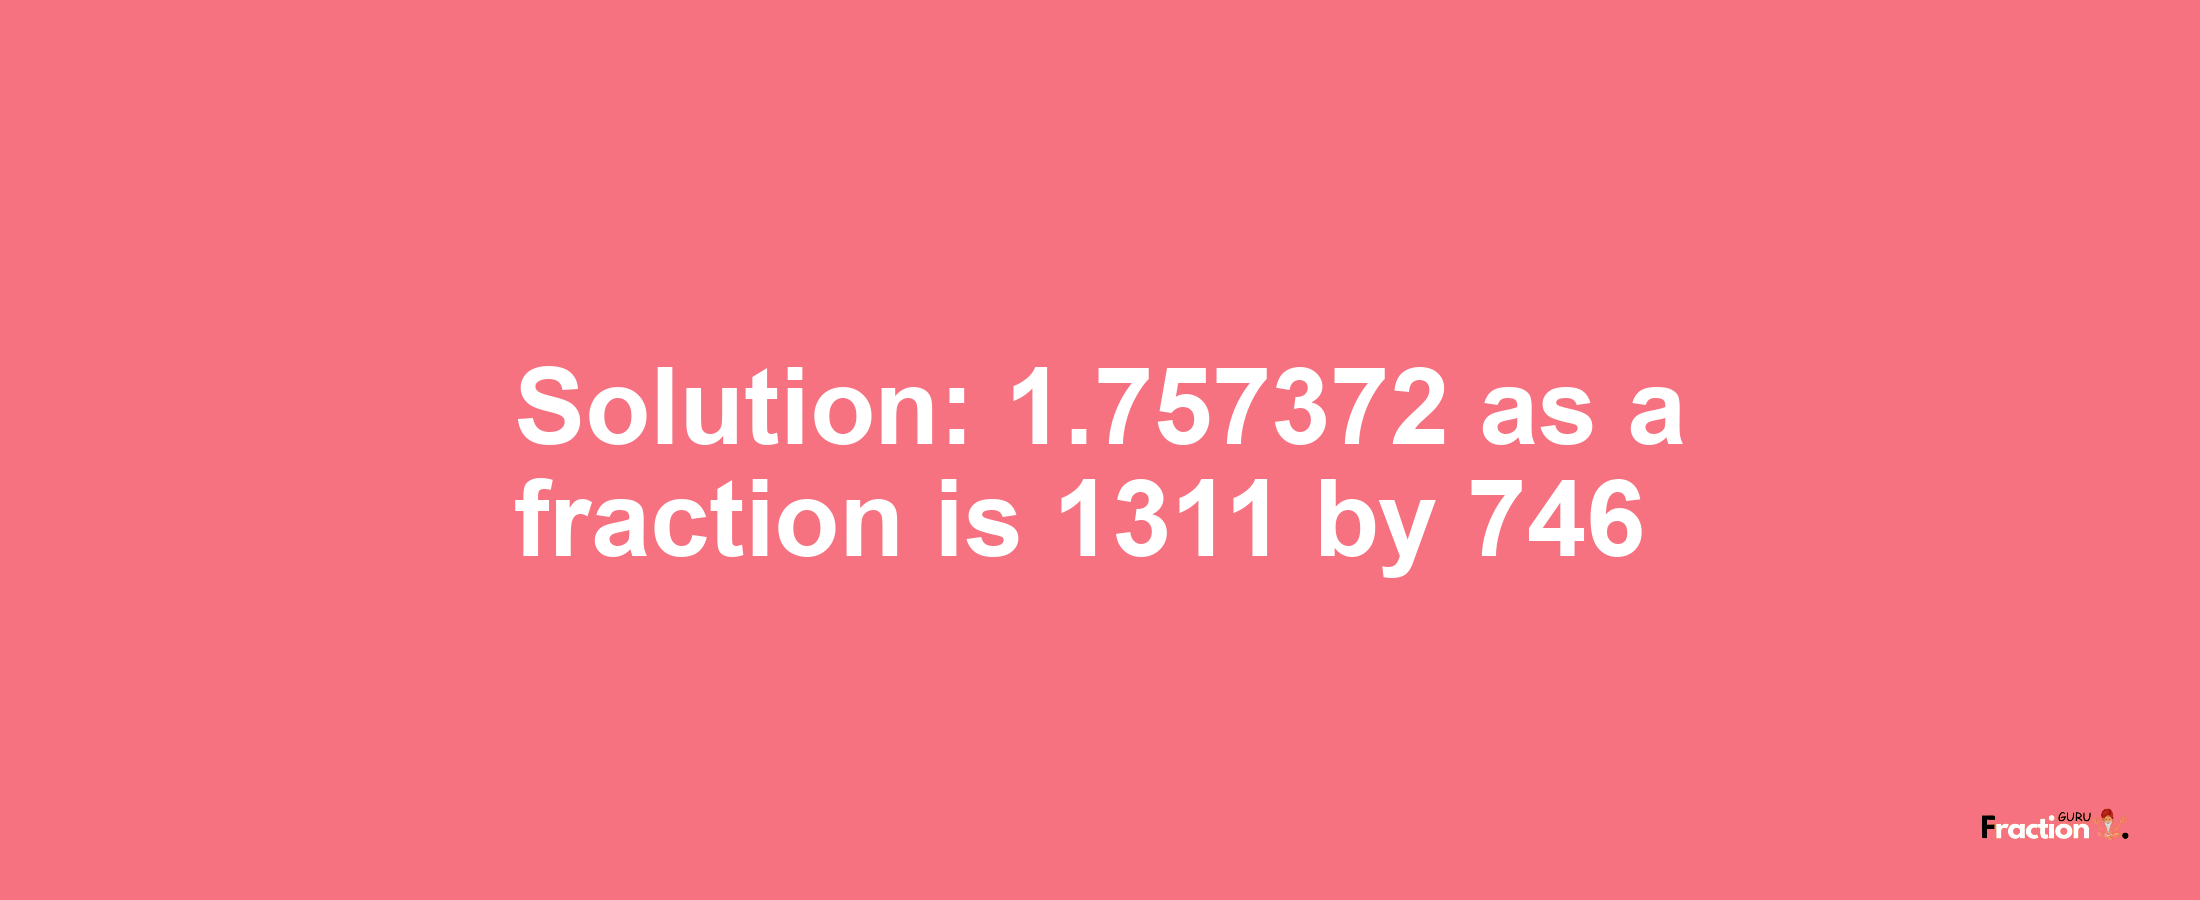 Solution:1.757372 as a fraction is 1311/746